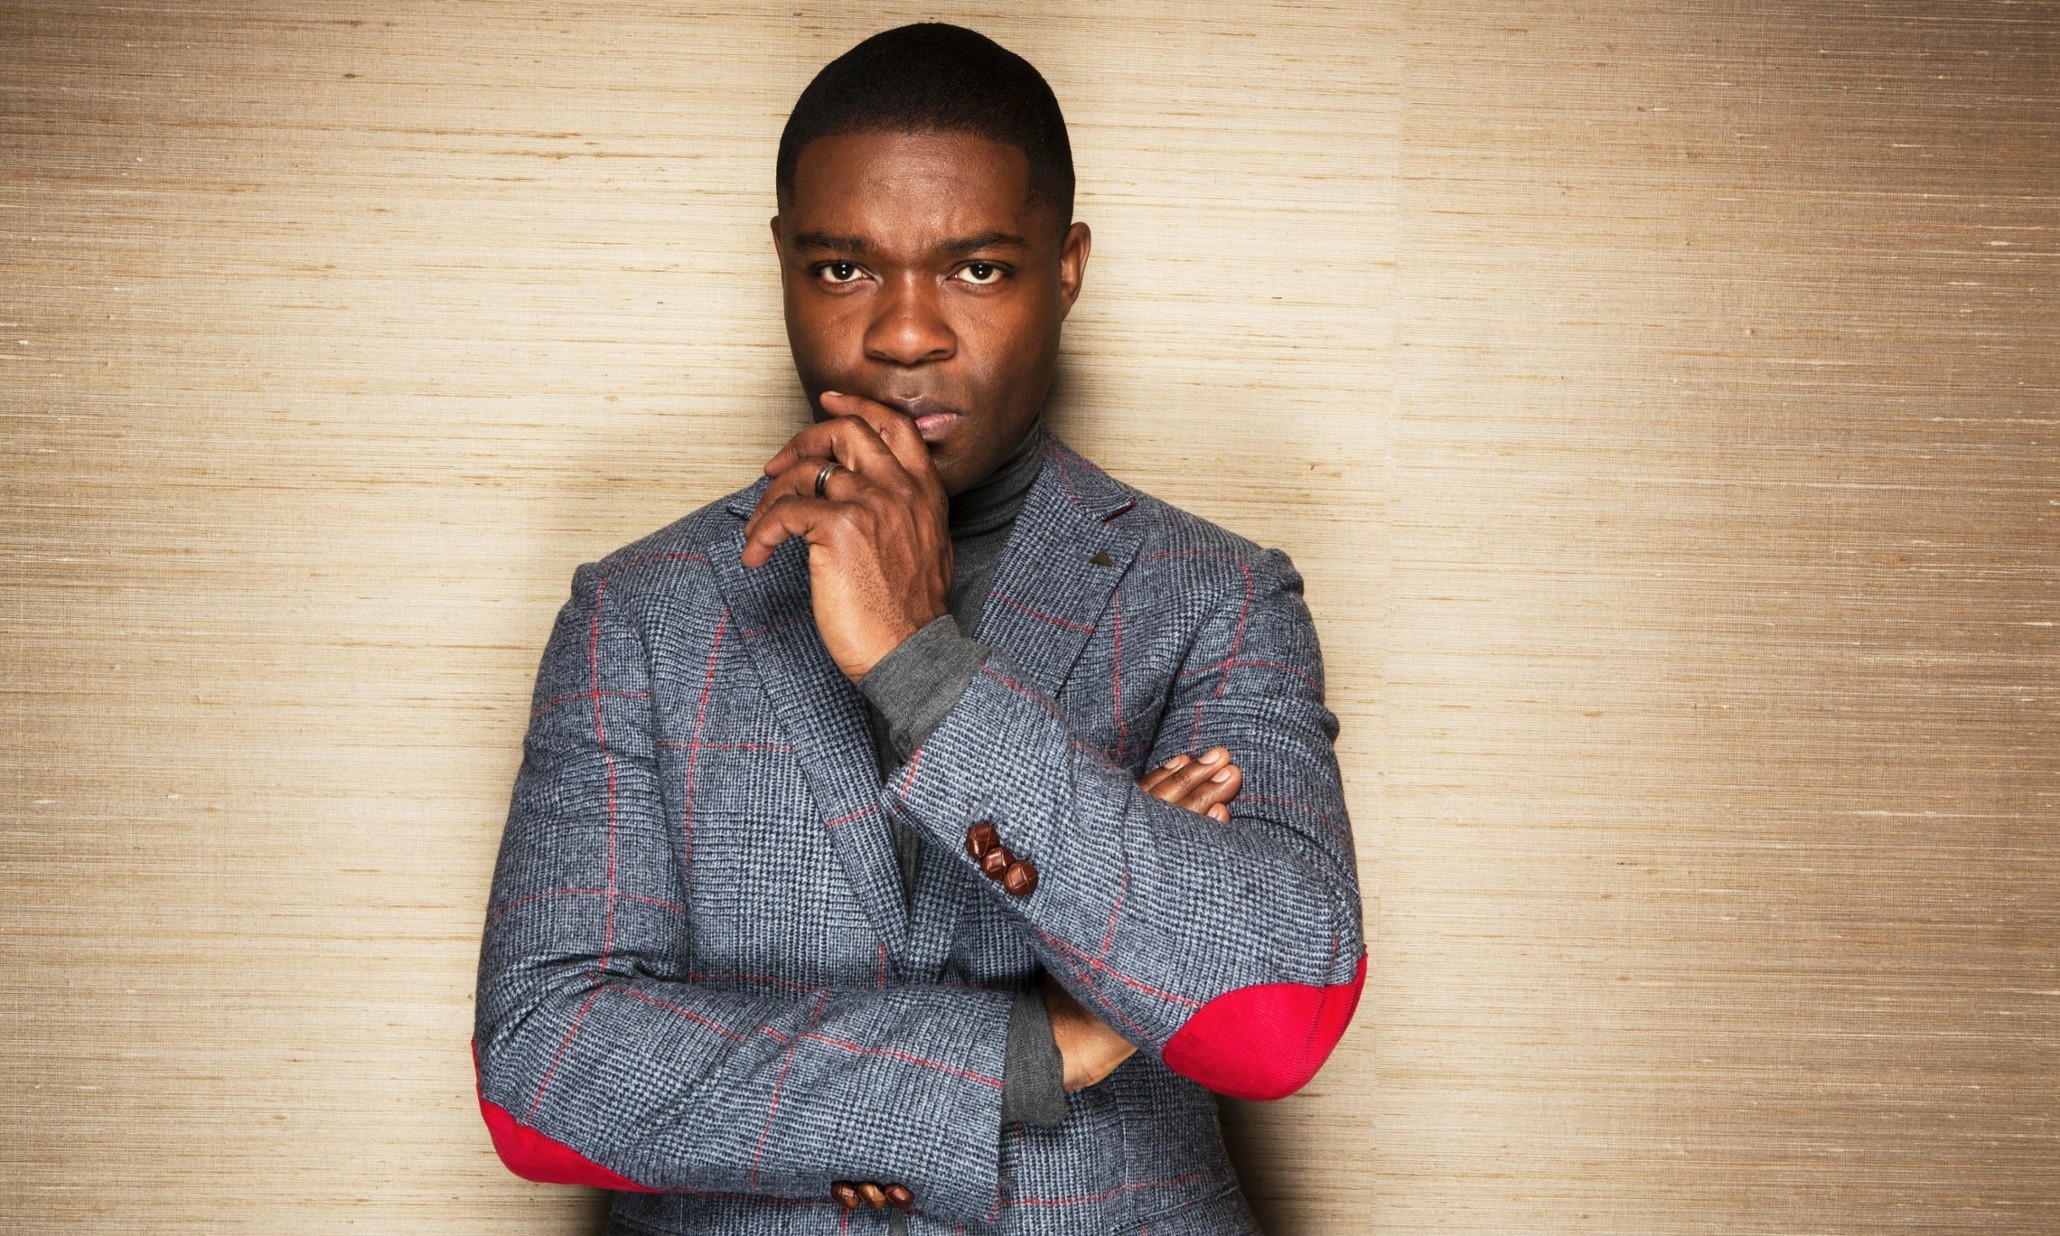 David Oyelowo is a British actor. He has played supporting roles in the films 'Rise of the Planet of the Apes' ,'Middle of Nowhere', 'Lincoln' and garnered praise for portraying Louis Gaines in 'The Butler'. On television , he played M15 officer Danny Hunter in the British series 'Spooks'. In 2014, Oyelowo played Martin Luther King, Jr in the biographical drama film ' Selma', for which he received a Golden Globe for Best Actor. David Oyelowo is photographed at the Corinthia Hotel in central London, England.